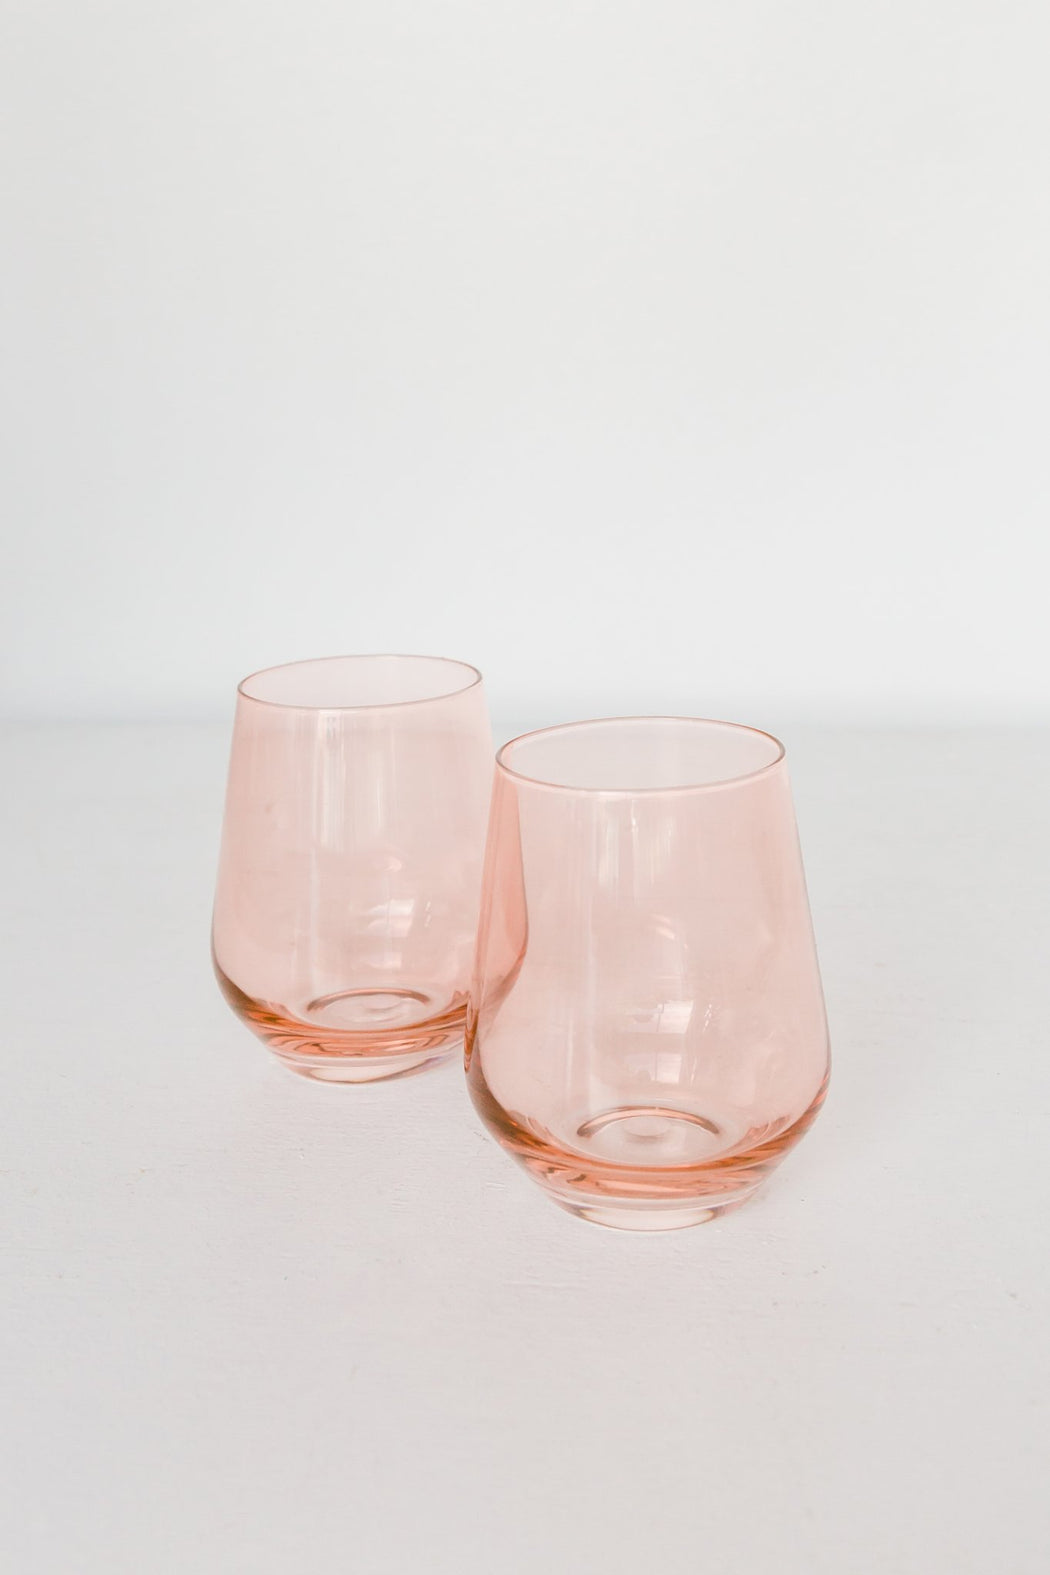 Stemless Wine Glasses in Blush Pink